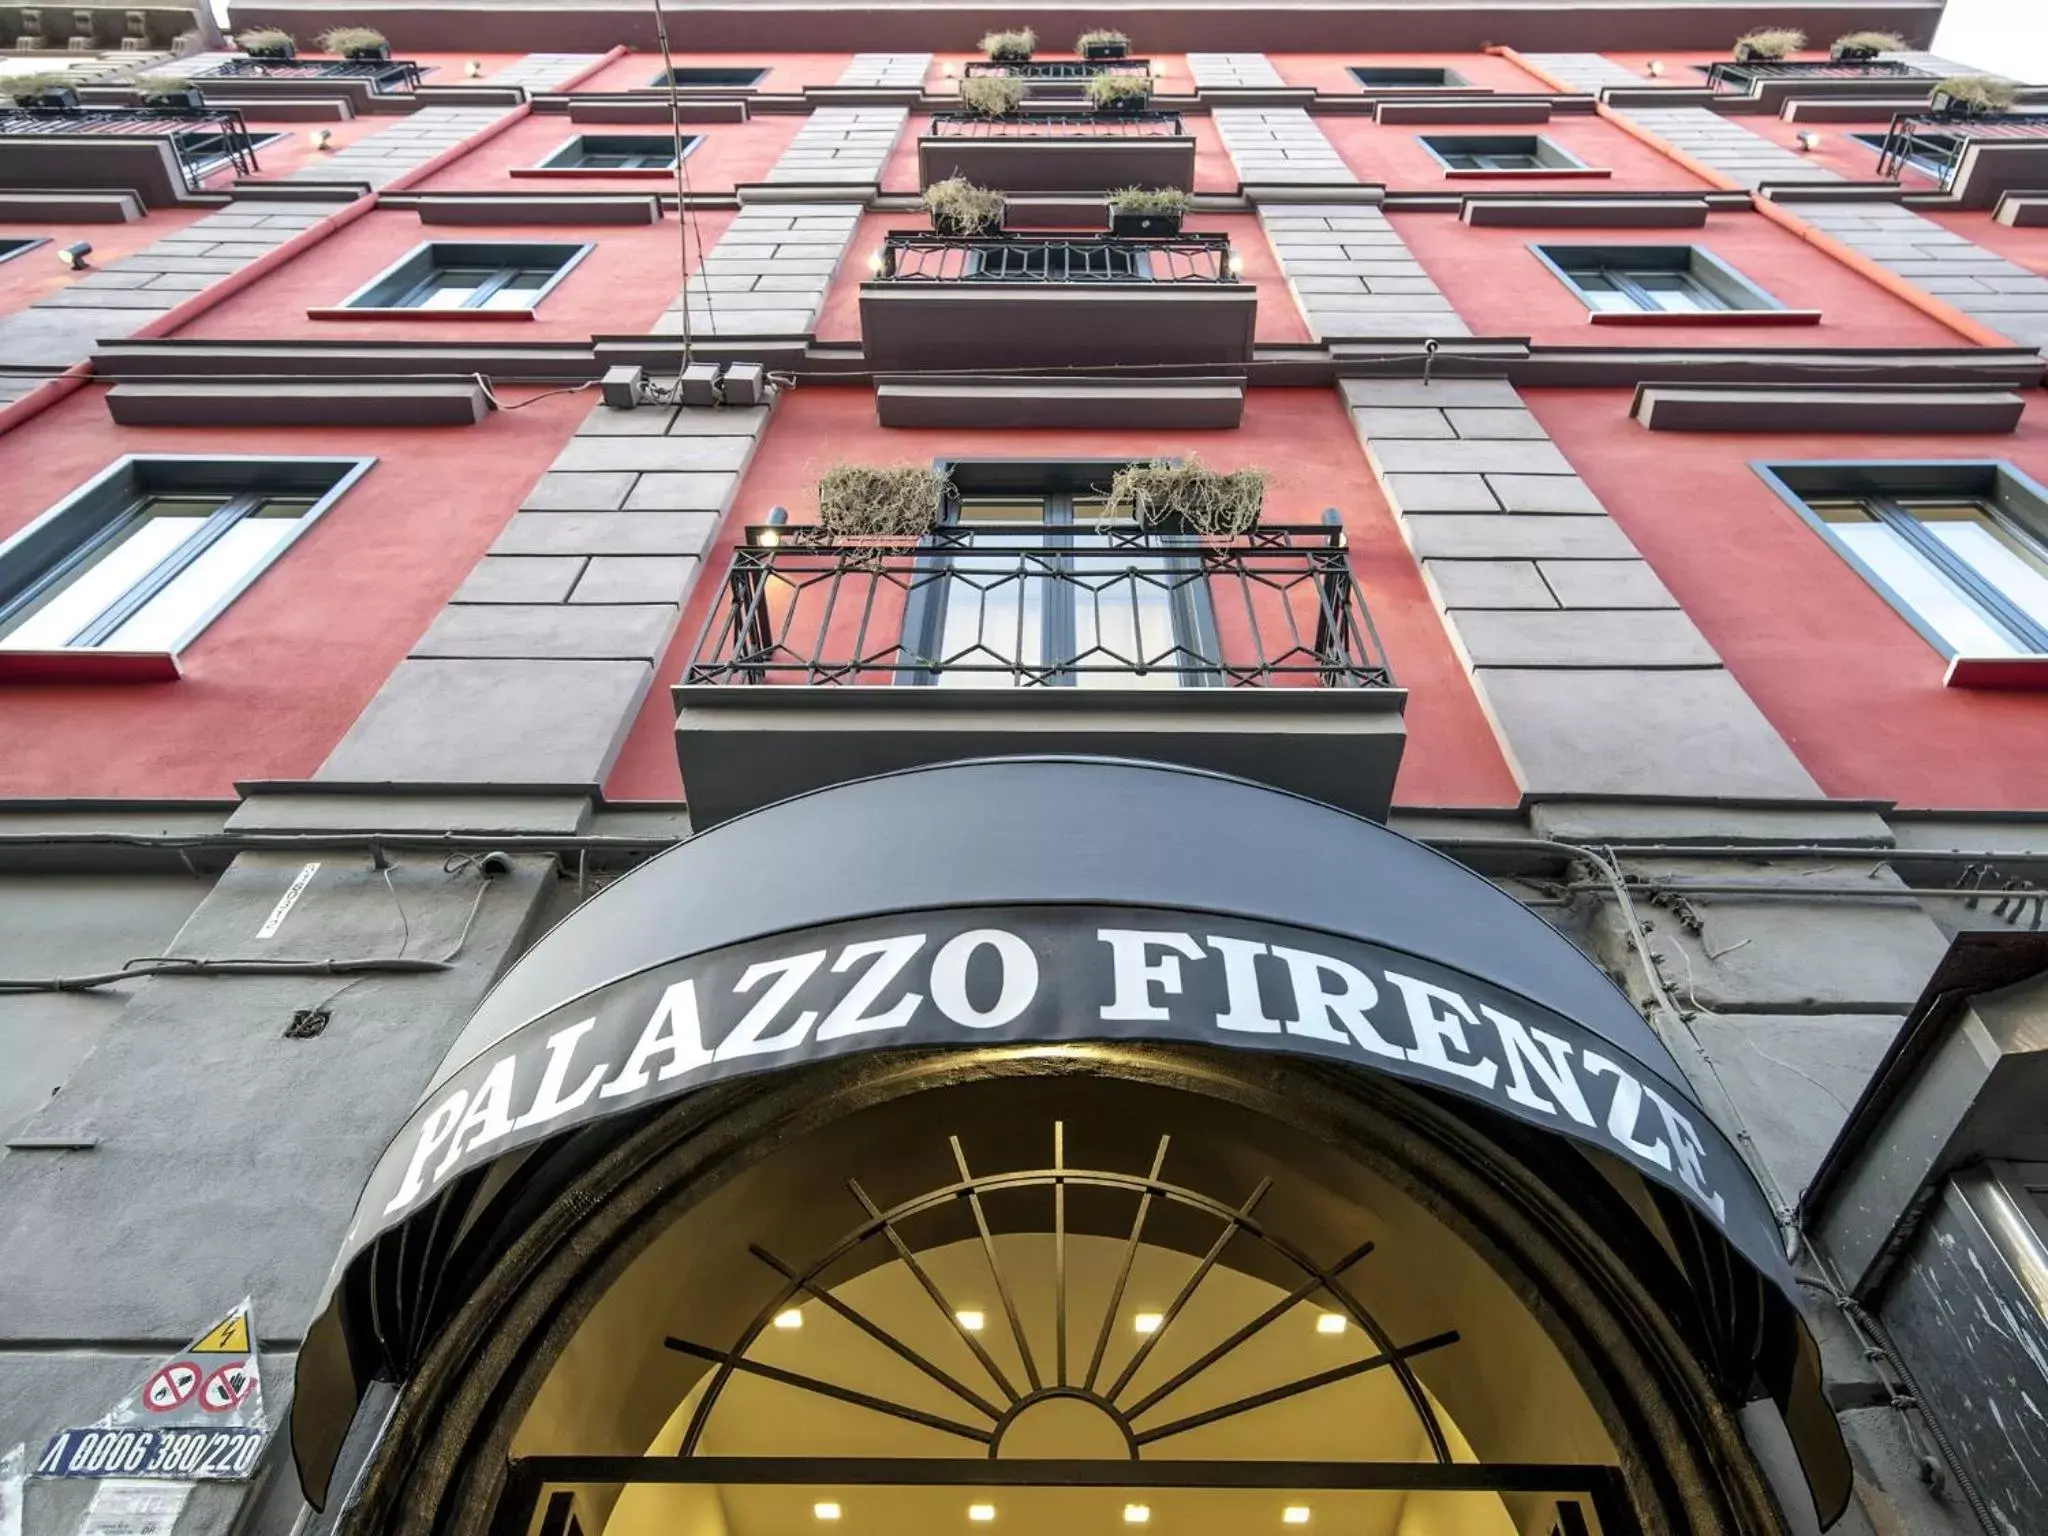 Property Building in Palazzo Firenze